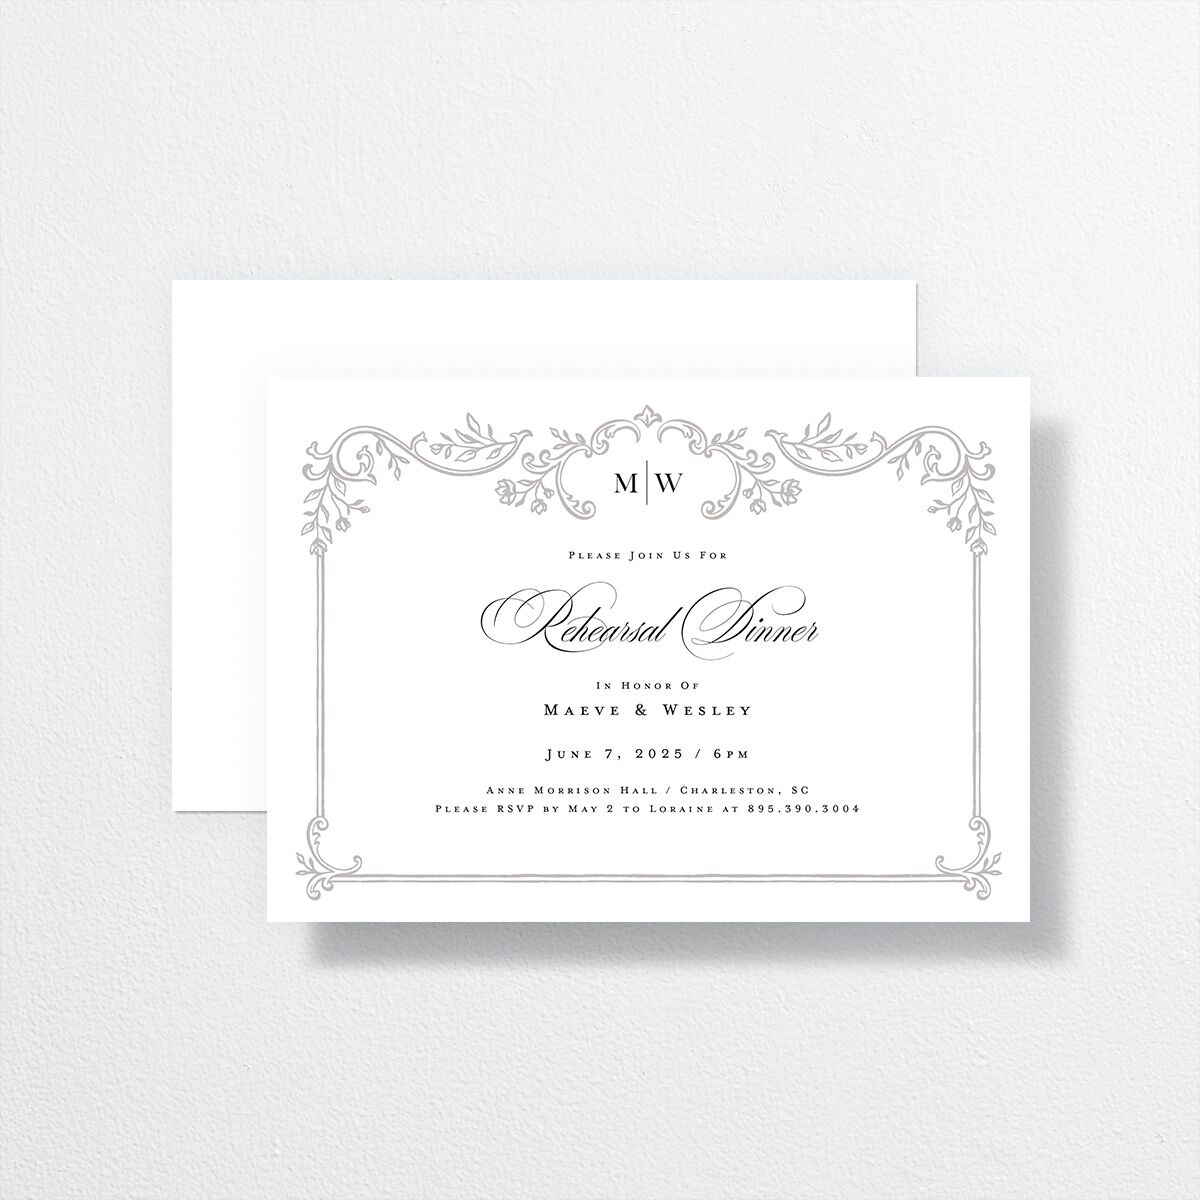 Opulences Rehearsal Dinner Invitations by Vera Wang front-and-back in white